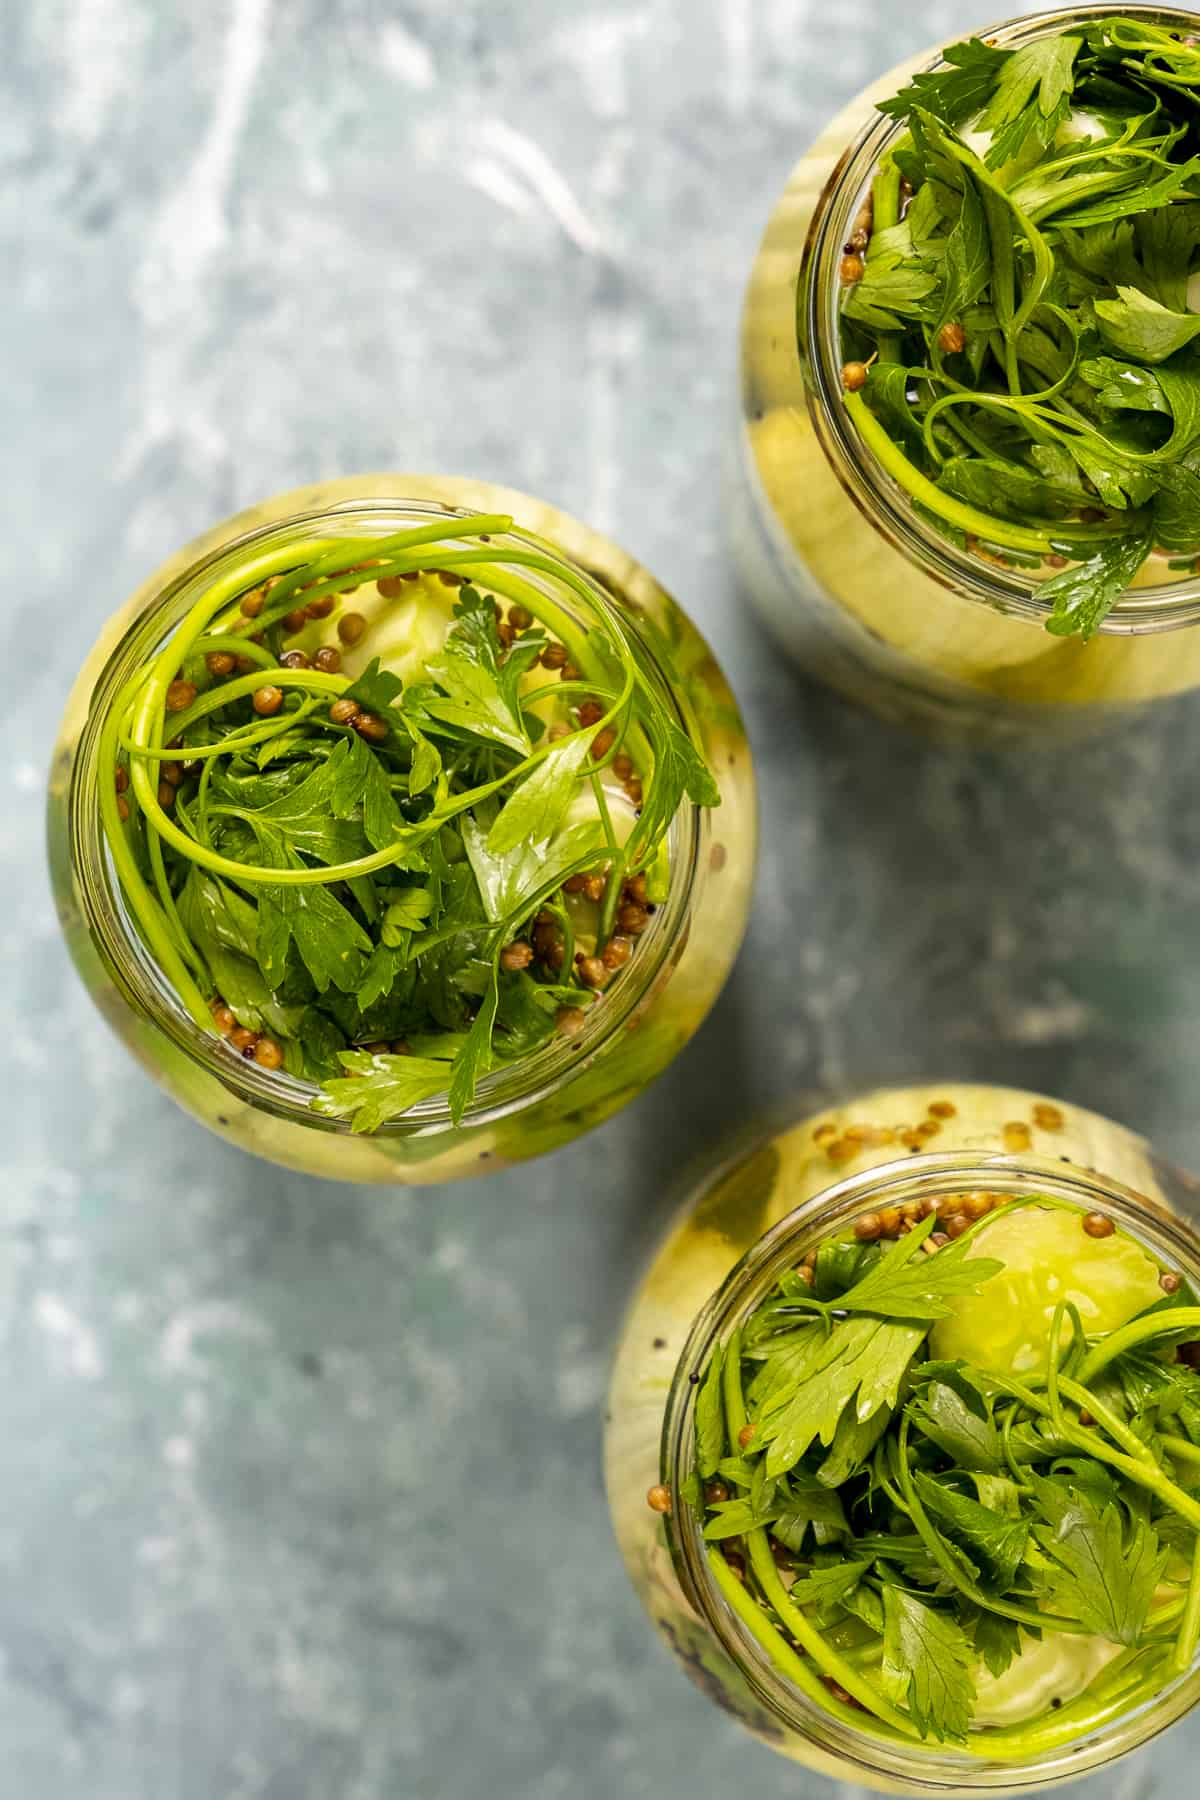 Armenian cucumbers are topped with parsley in tjhee jars.